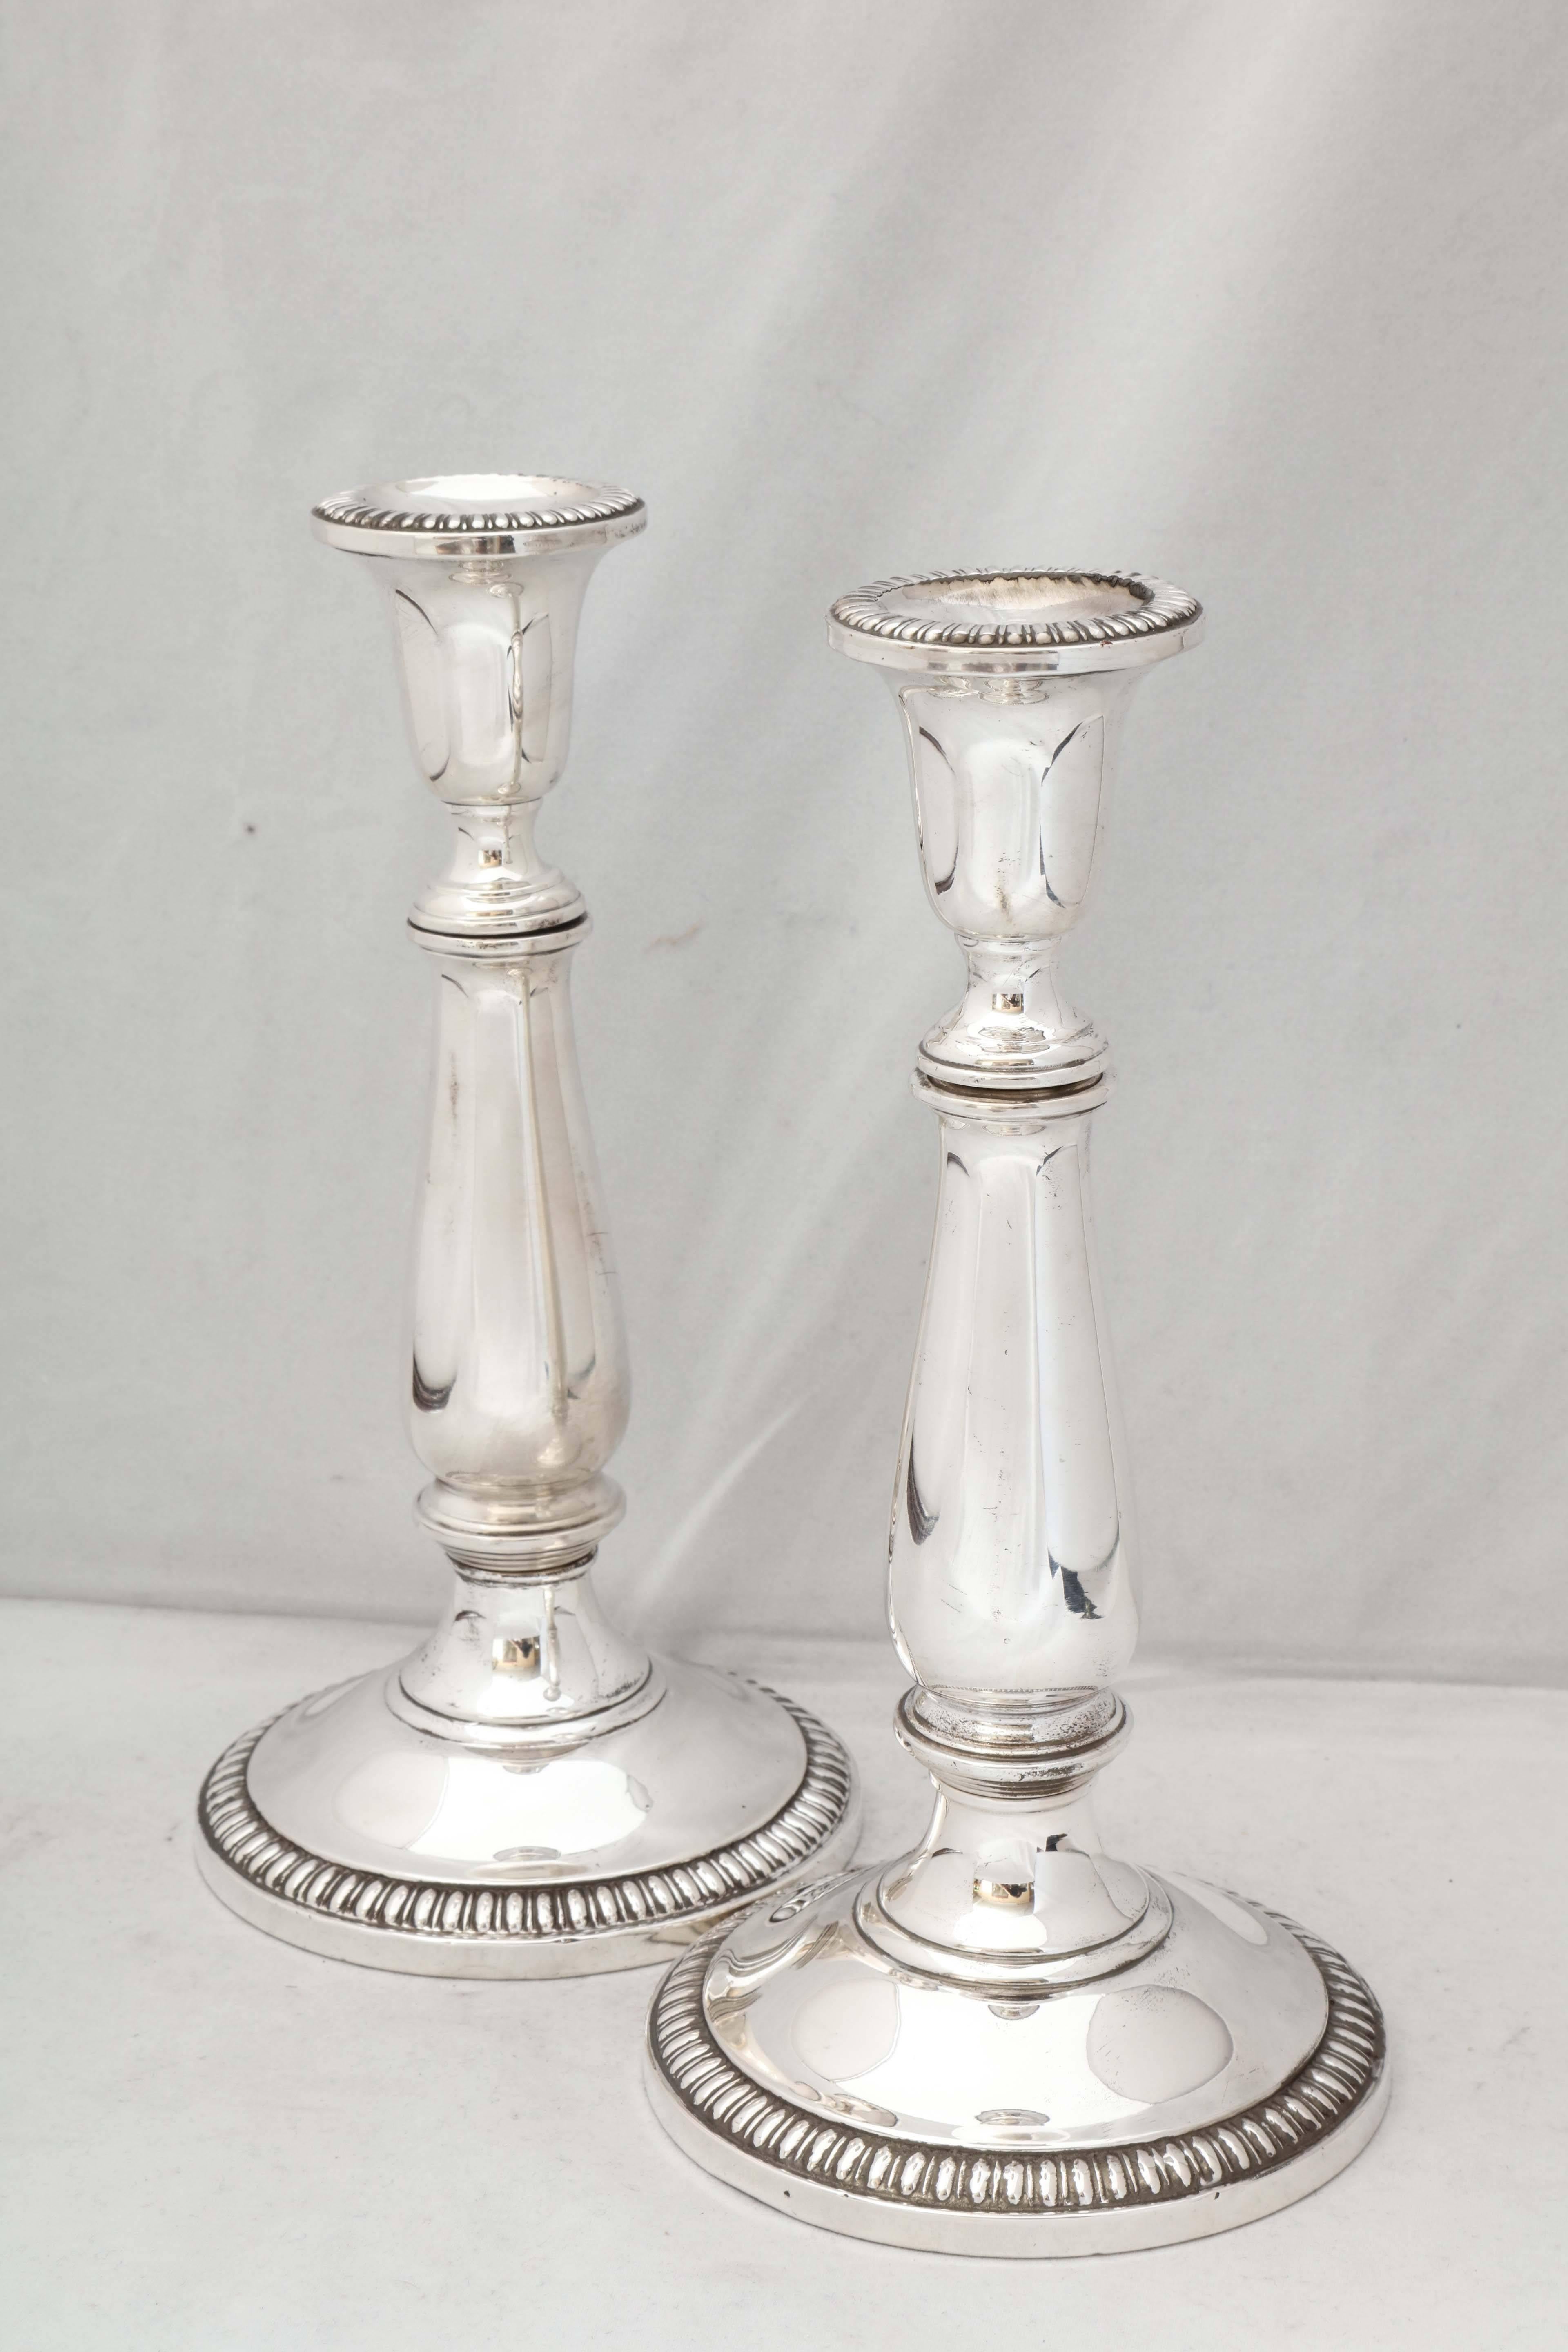 Empire Style pair of sterling silver candlesticks, The Mueck-Carey Silver Co., New York, circa 1930's. Candlesticks separate into three pieces and can form two different sized candlesticks (see photos). Candlesticks have reeded borders on bases;